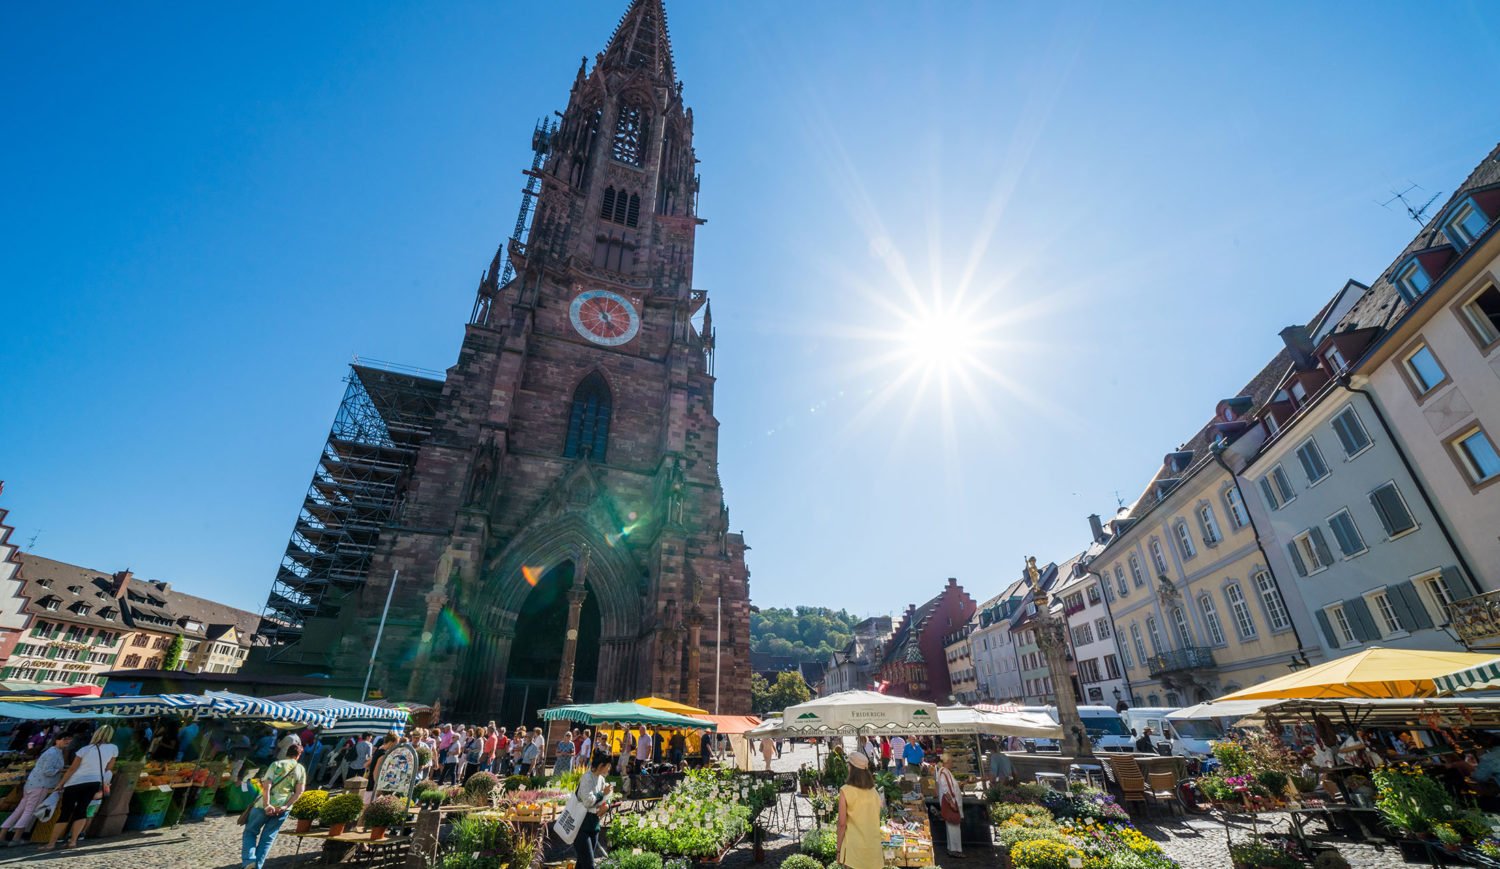 Fruit and vegetables in the shadow of the church - on the road at the Freiburg Cathedral Market